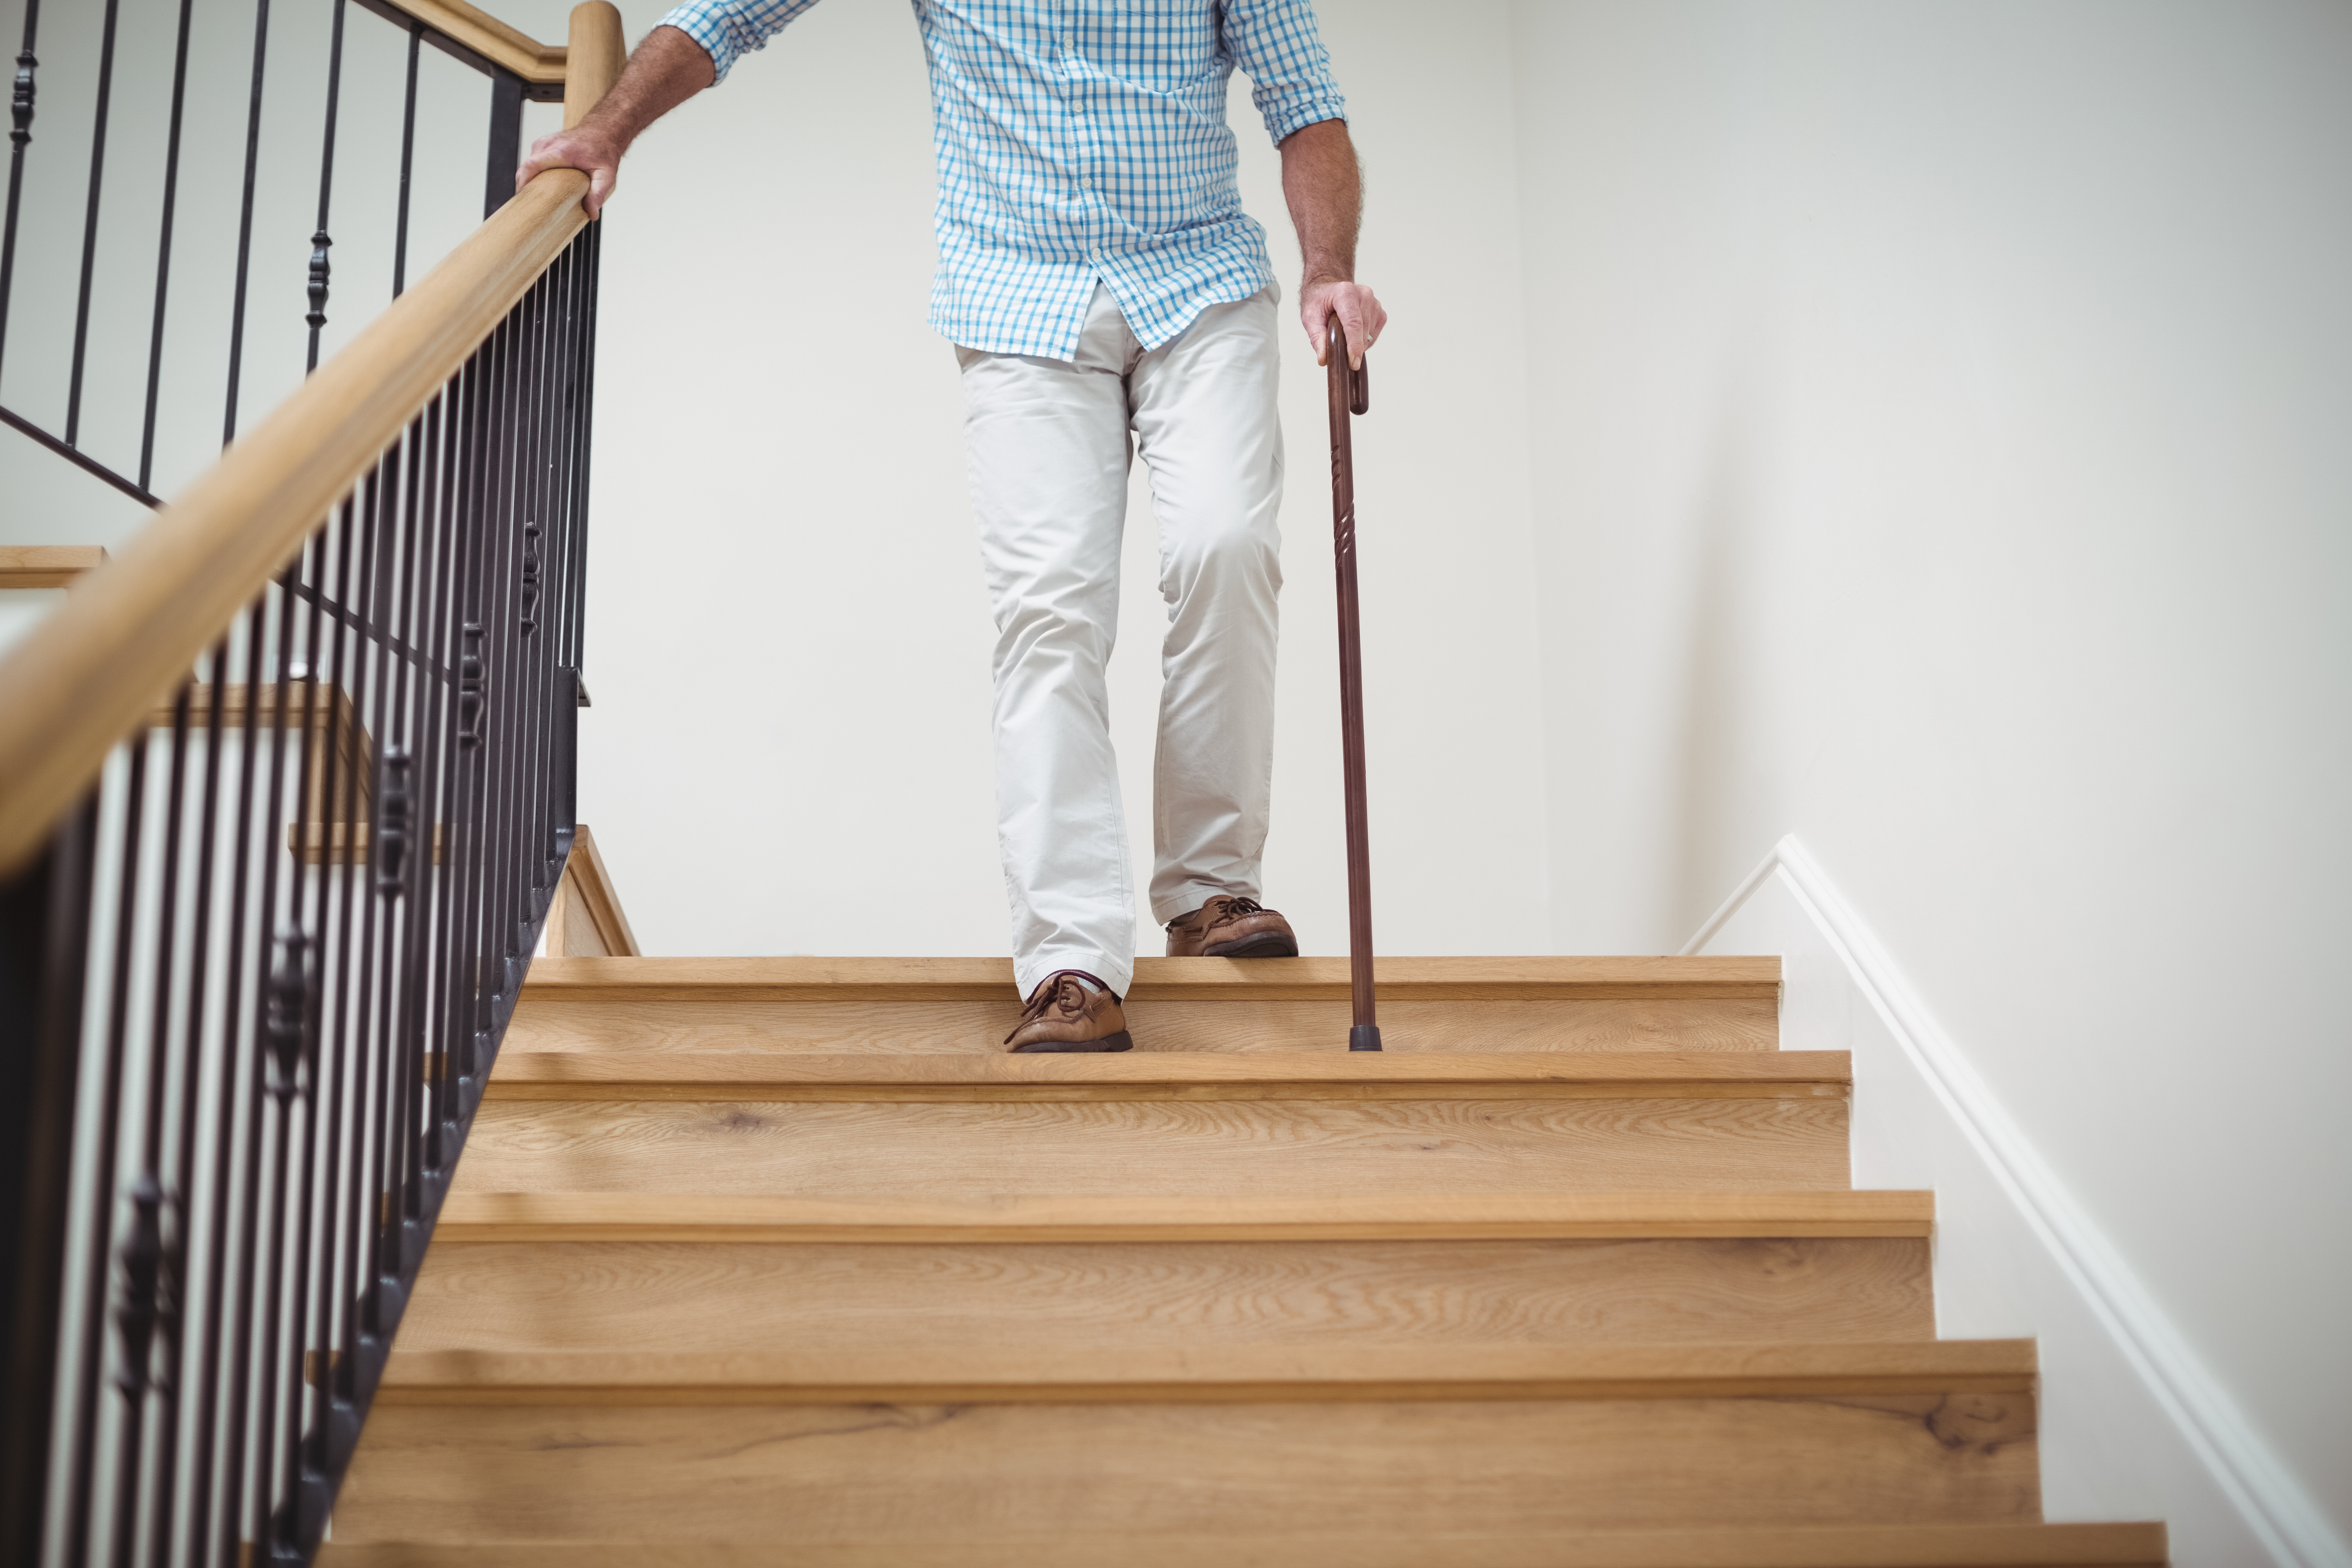 educator On the head of In need of Do stairlifts need LOLER? What are the requirements?